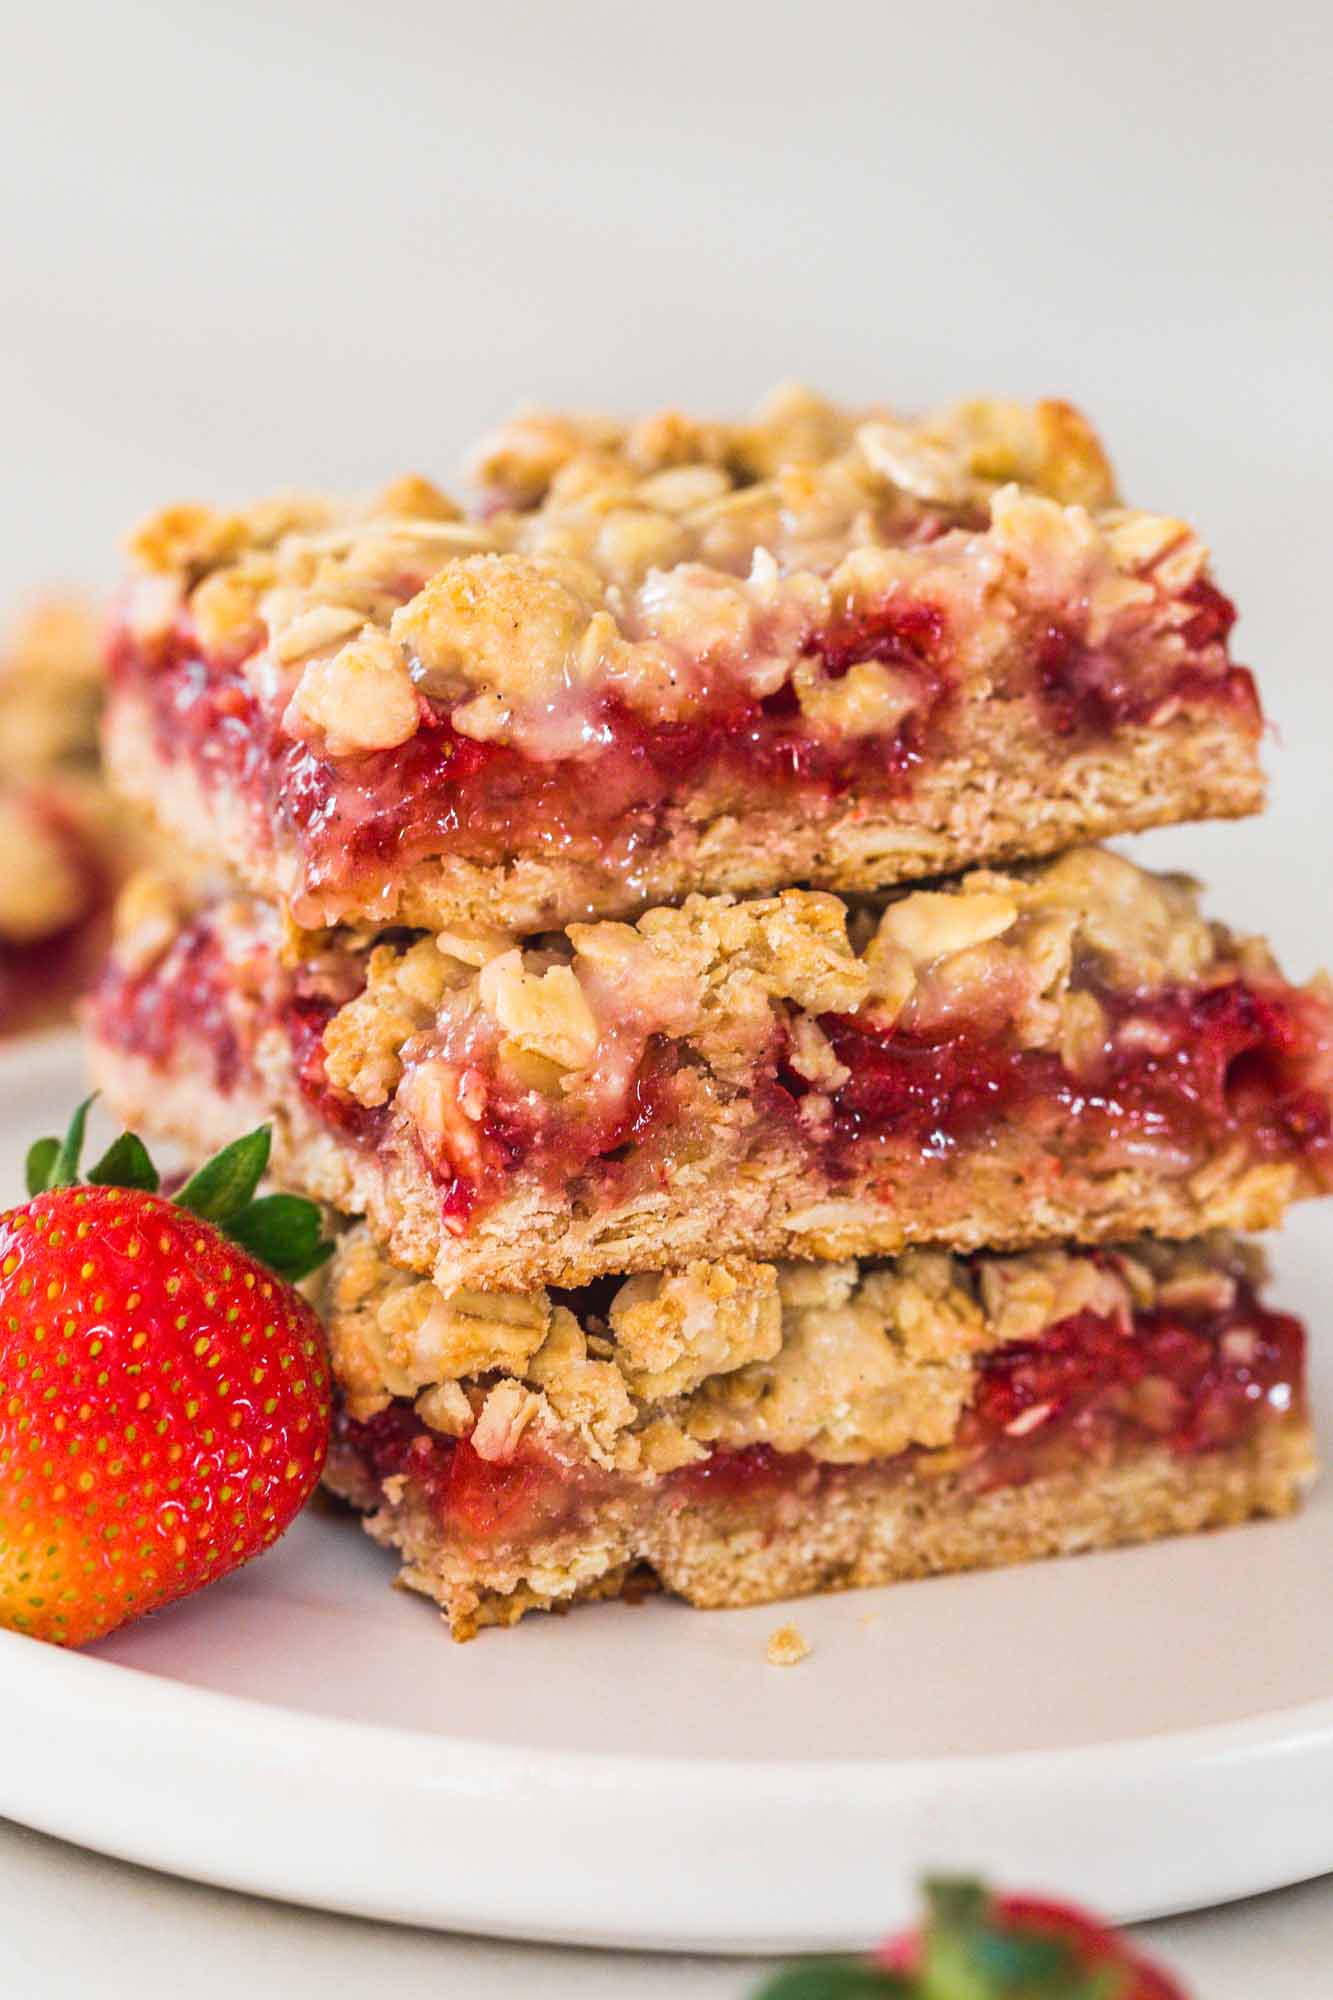 Strawberry Oatmeal Bars stacked on each other, with fresh strawberry on the side